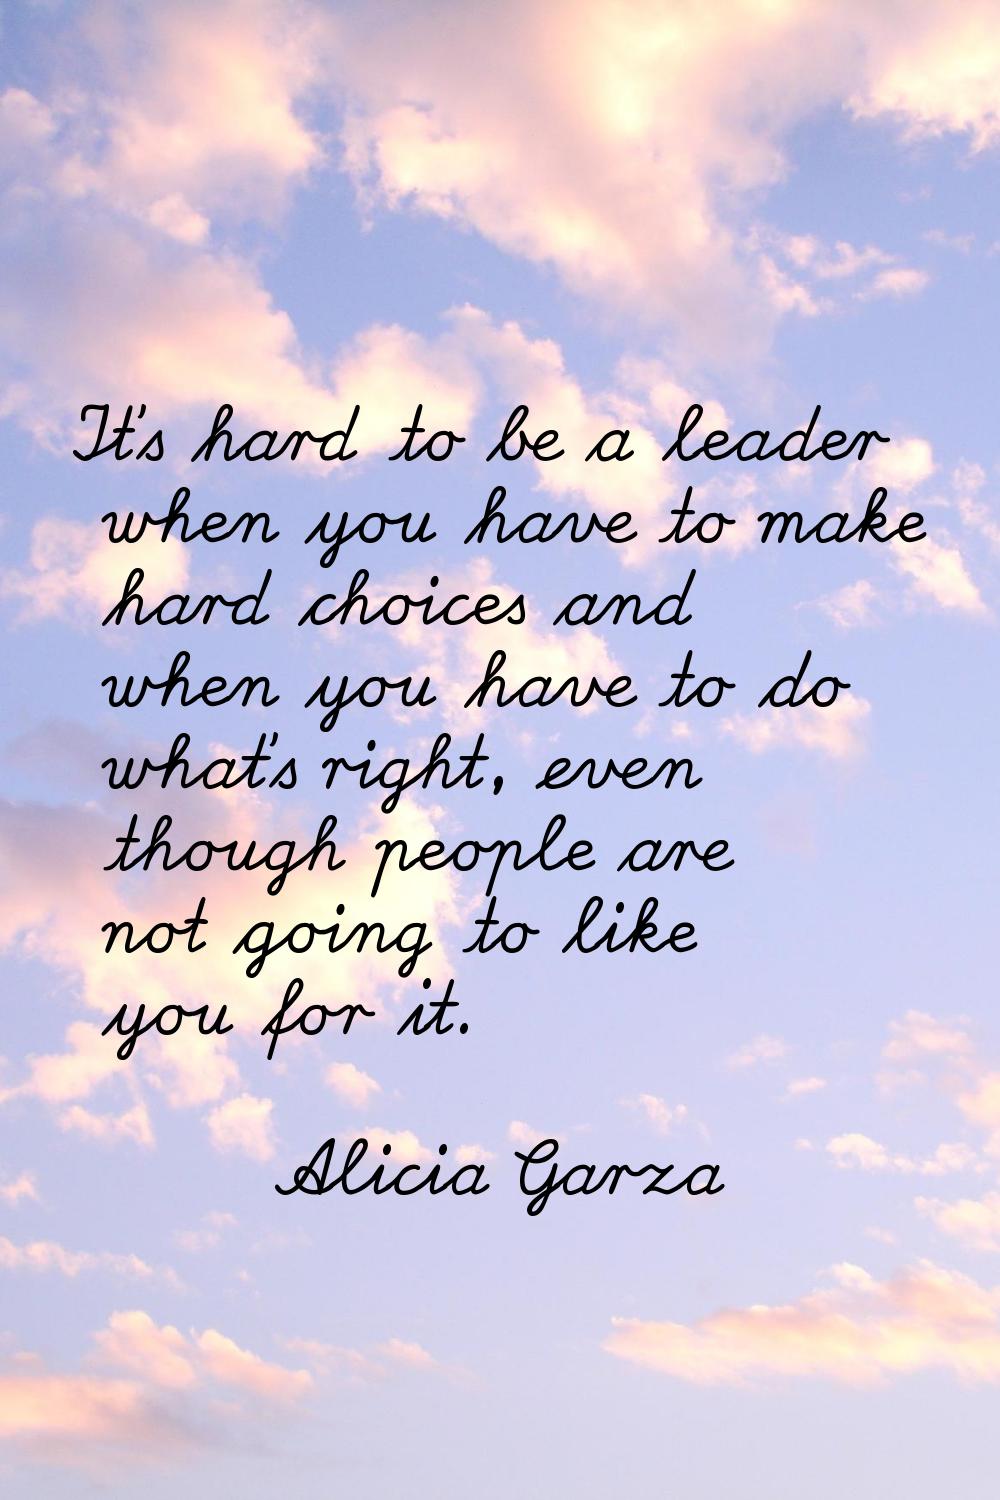 It's hard to be a leader when you have to make hard choices and when you have to do what's right, e